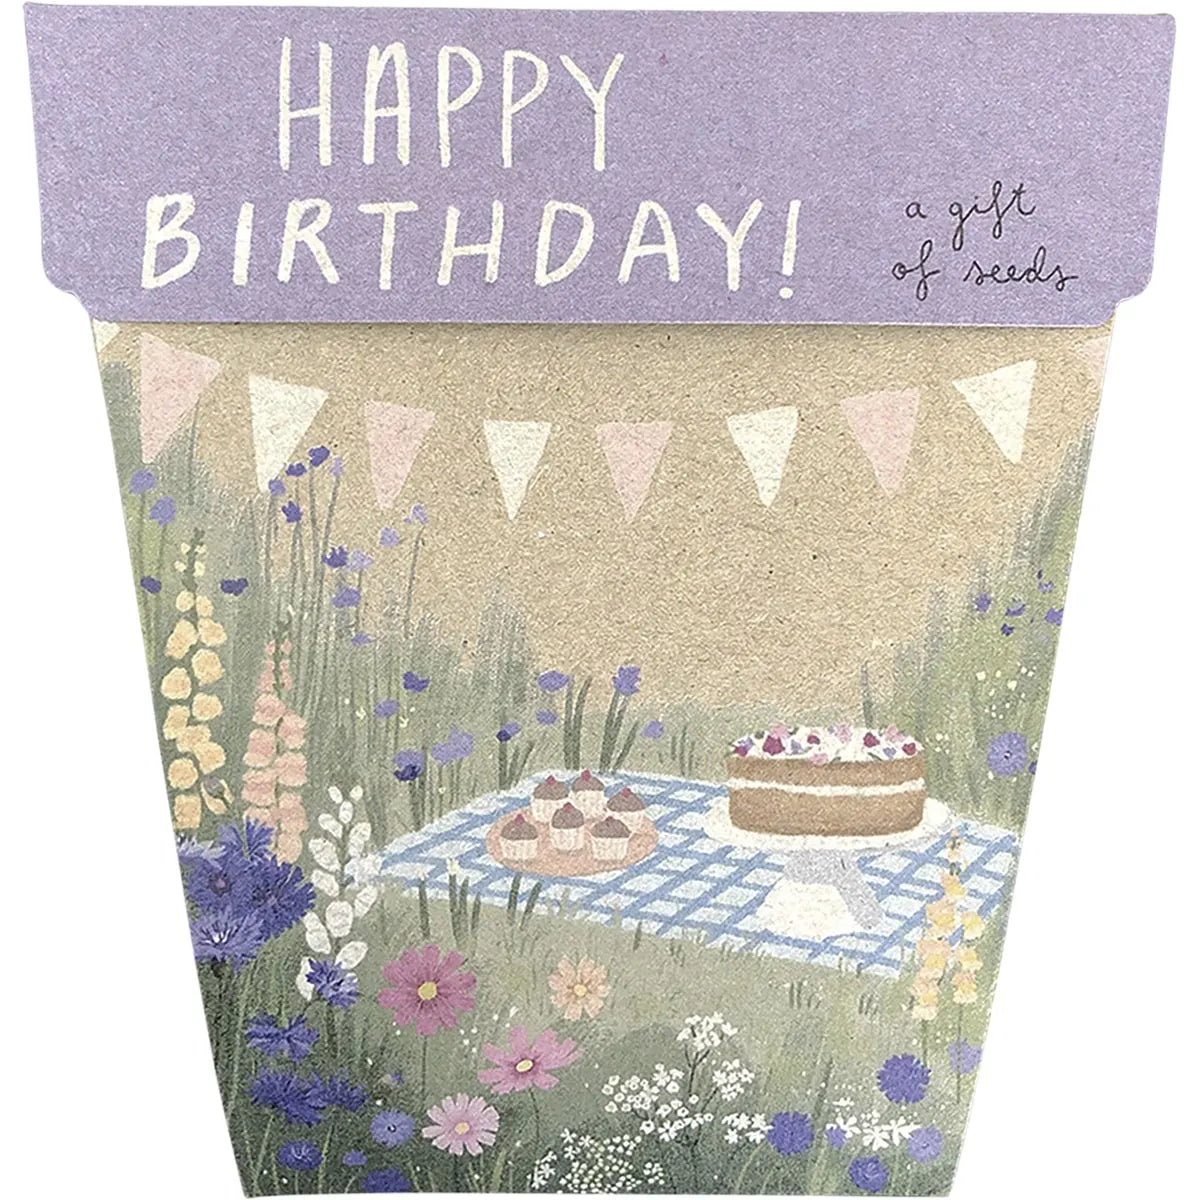 SOW 'N SOW - Gift of Seeds - Happy Birthday Picnic